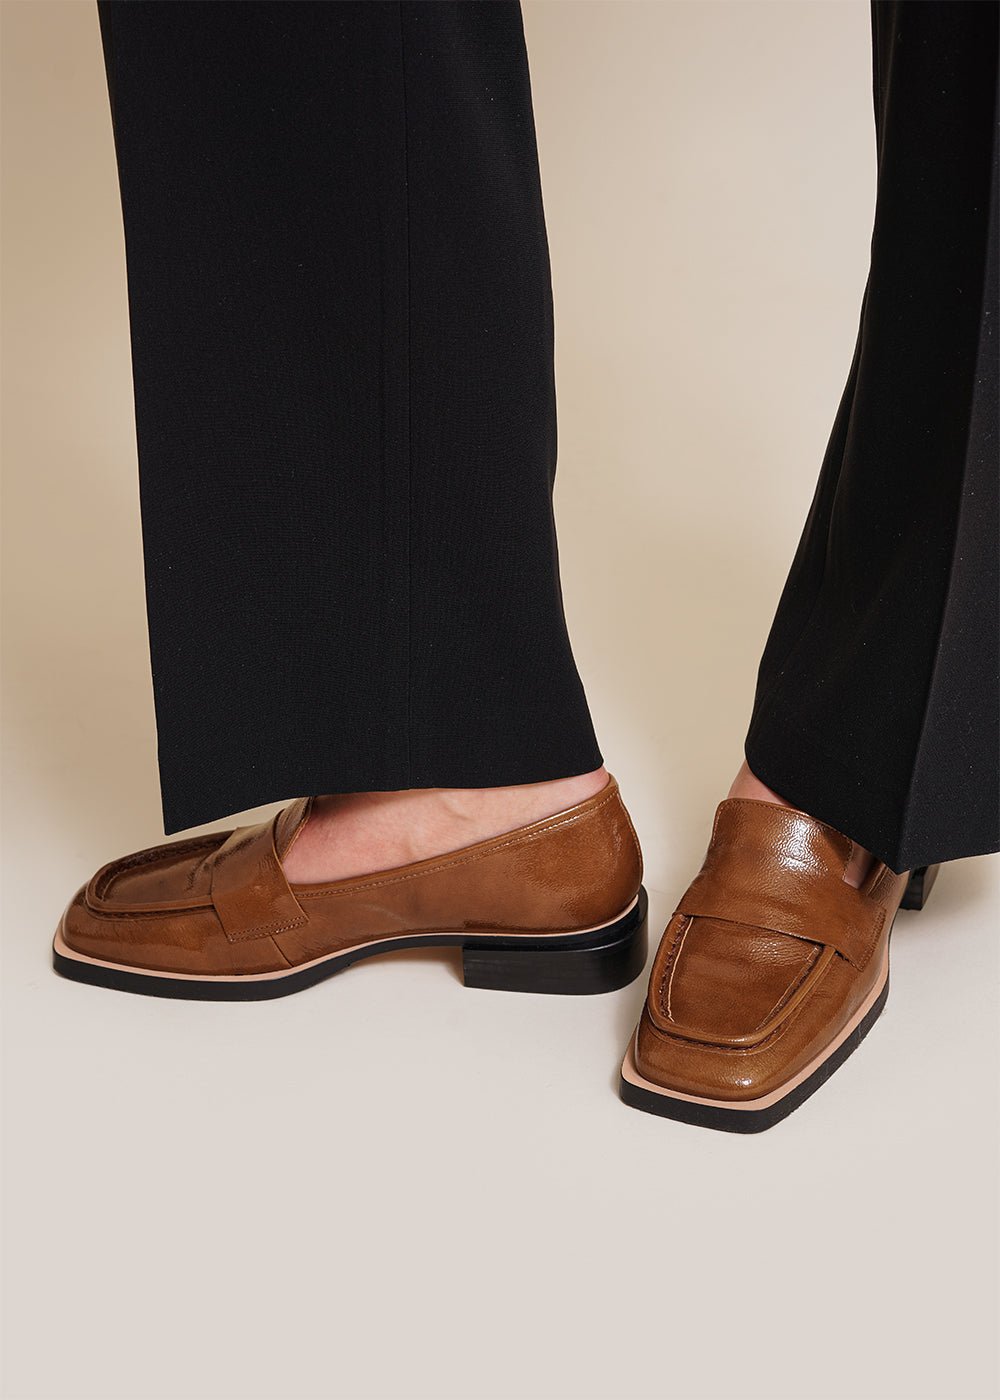 About Arianne Roble Miró Loafers - New Classics Studios Sustainable Ethical Fashion Canada